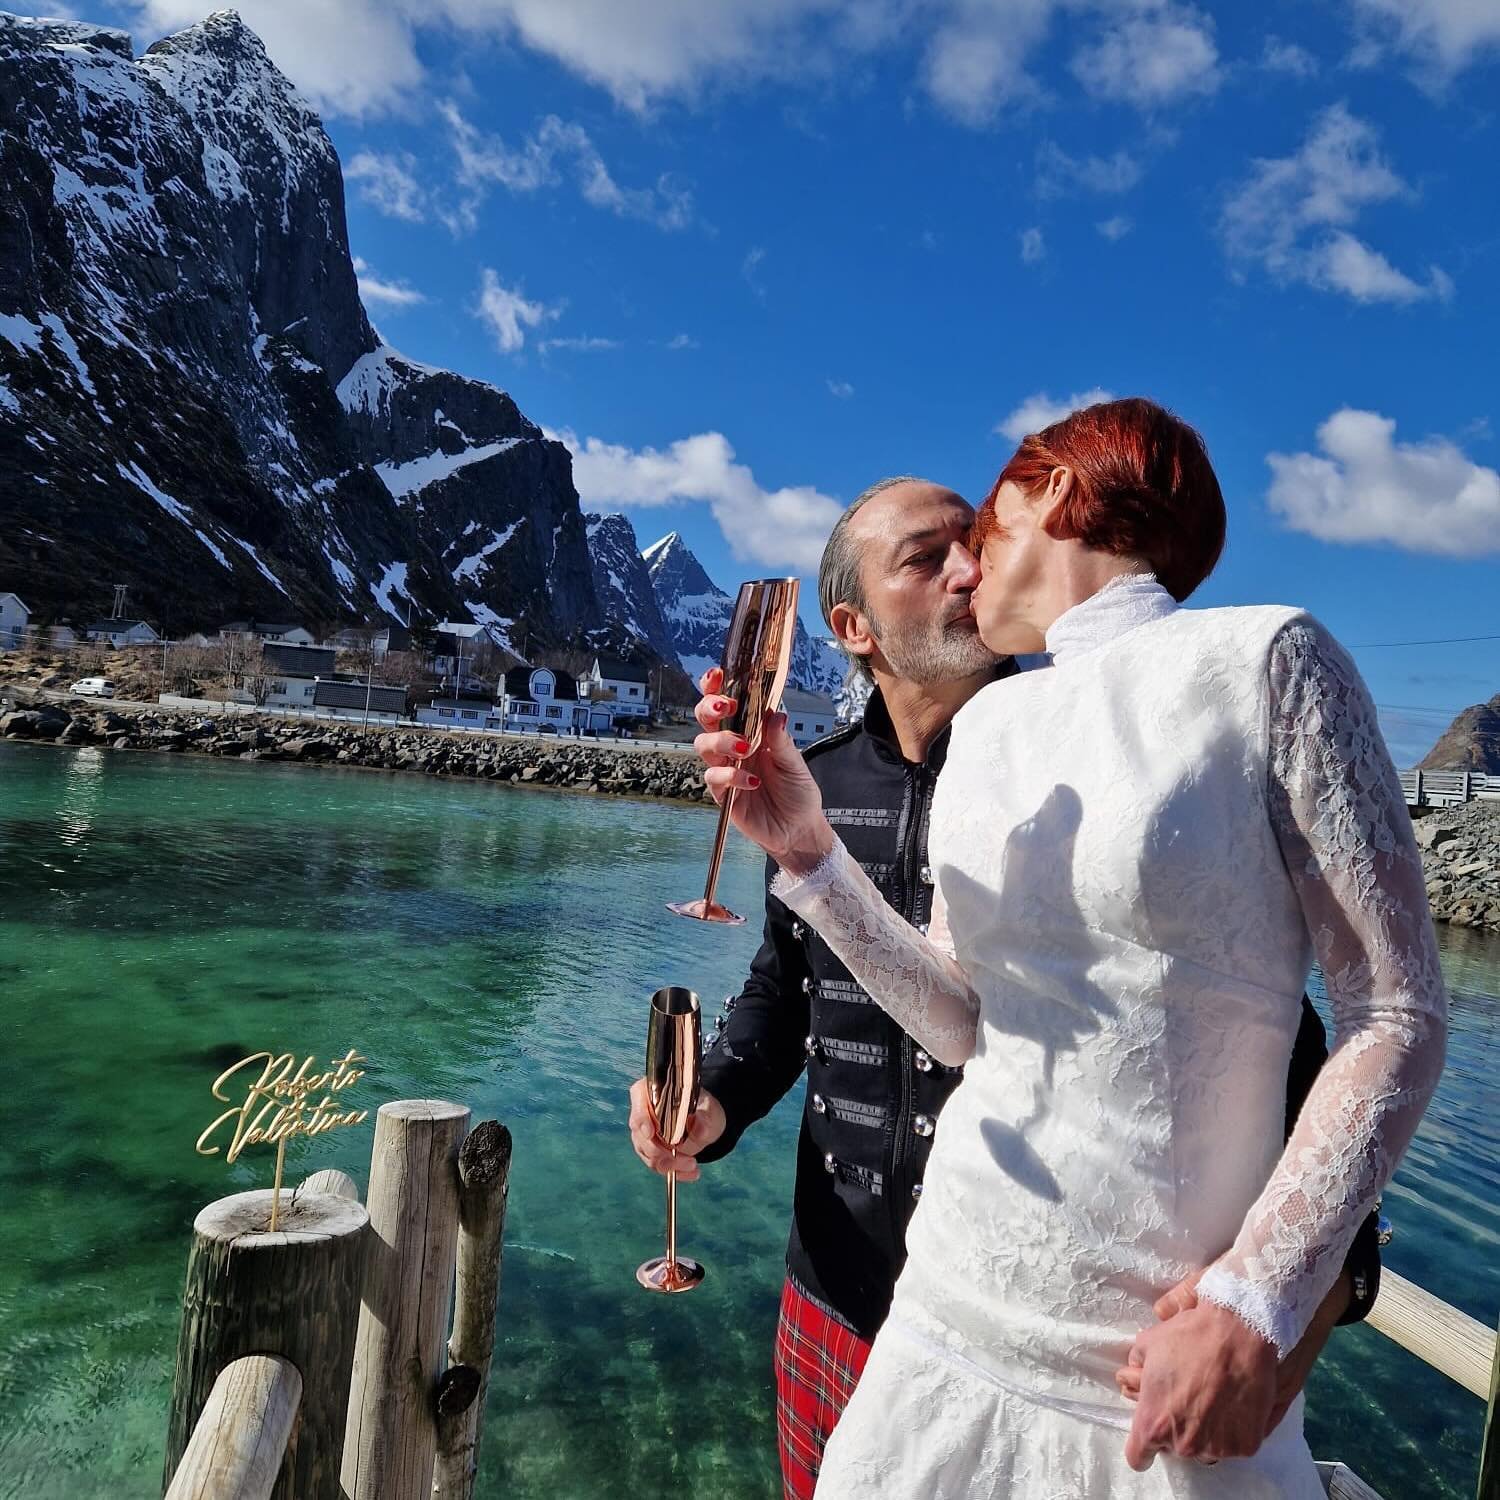 Thanks to the amazing @holistiskforbund we were able to help this lovely couple have their dream Lofoten elopement today. And what beautiful weather they got too. Lofoten is the paradise of the north. #fjirdwedding #fjordelopement #norwaywedding #wed